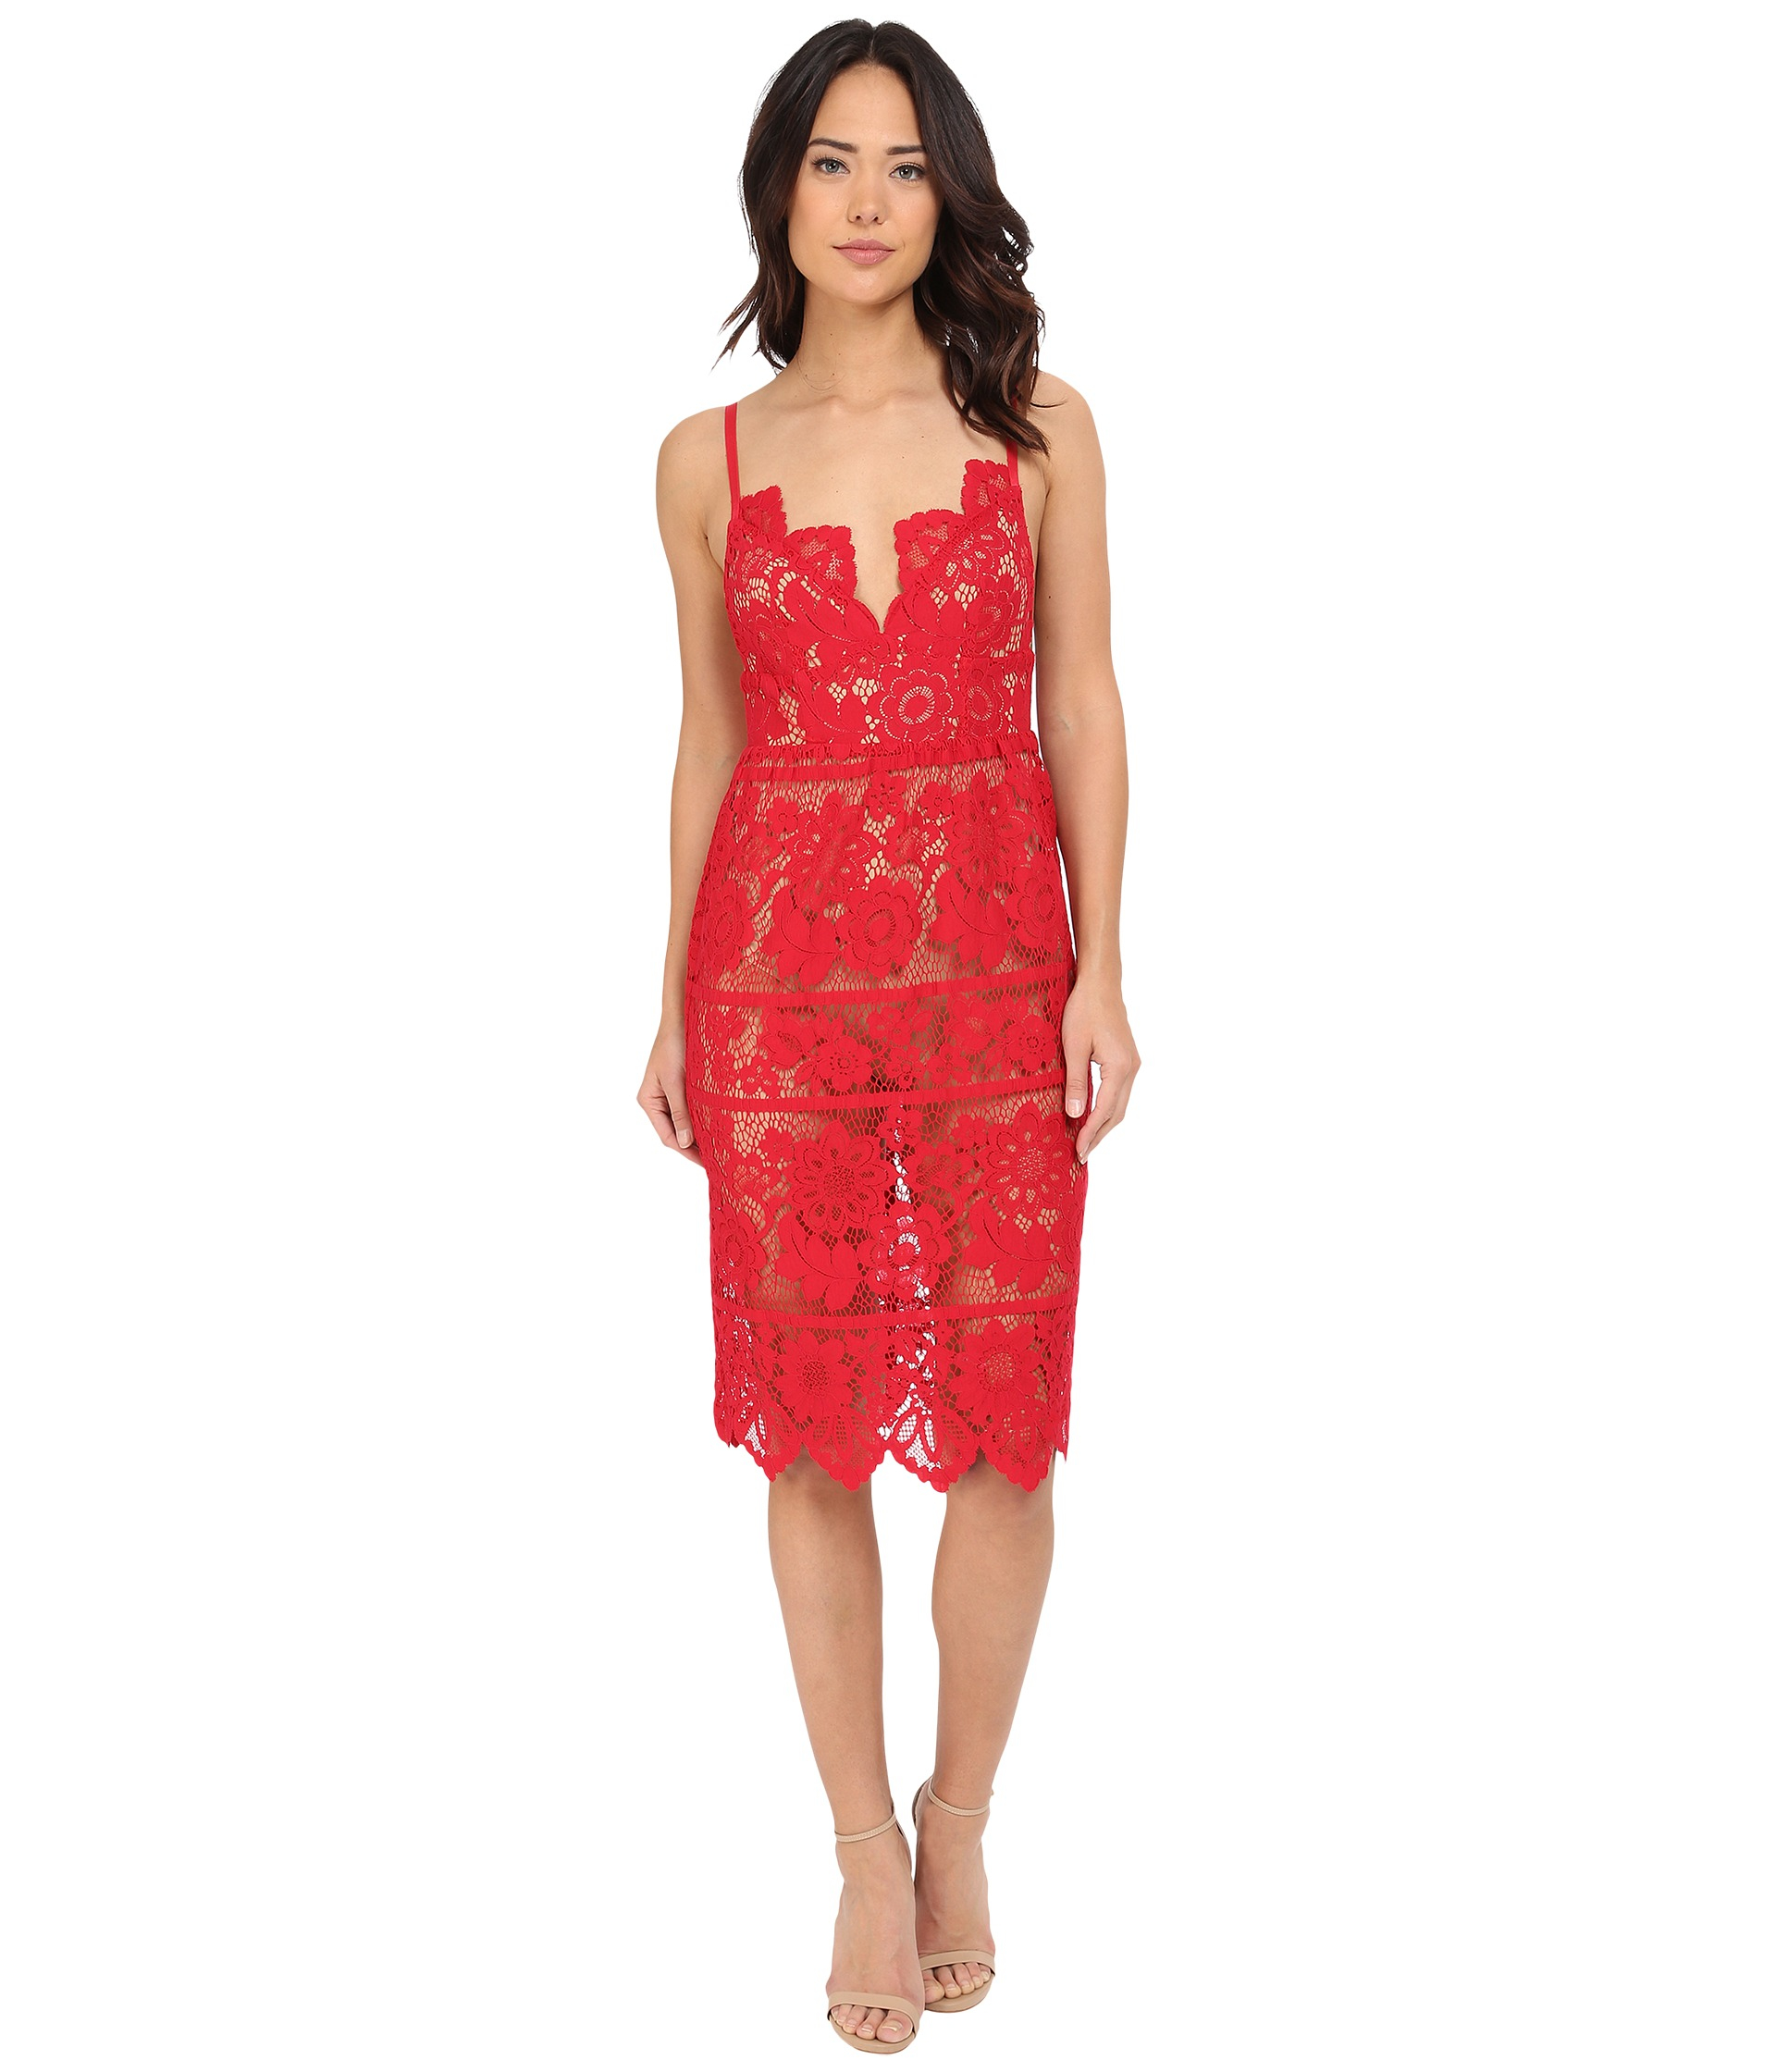 for love and lemons red lace dress